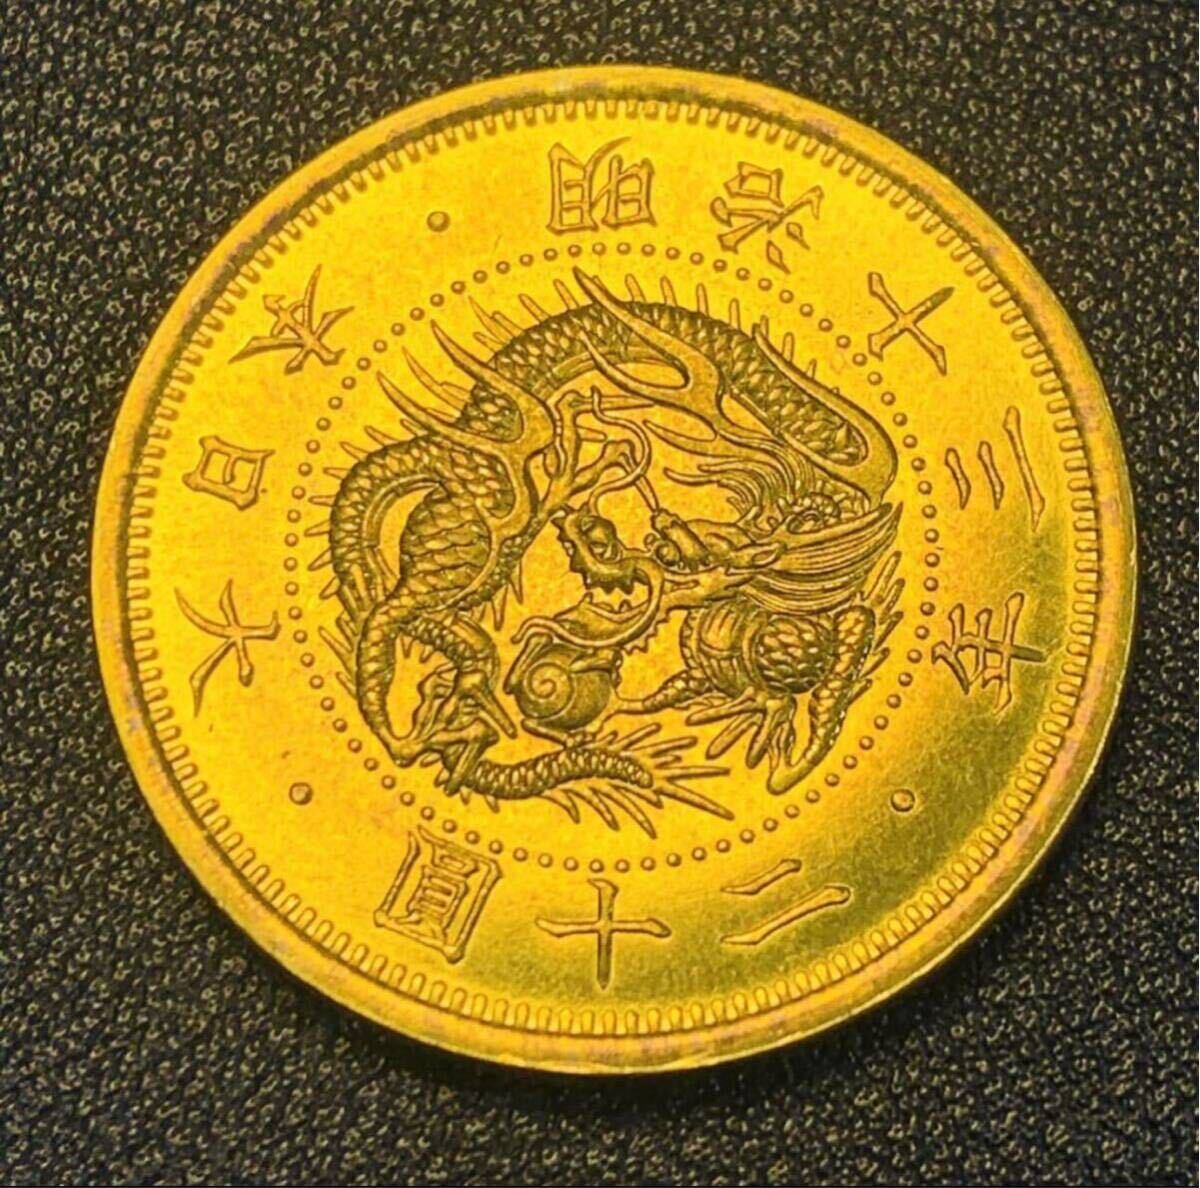  gold coin coin Japan old coin old two 10 jpy .. Meiji 10 three year two 10 . money collection dragon .